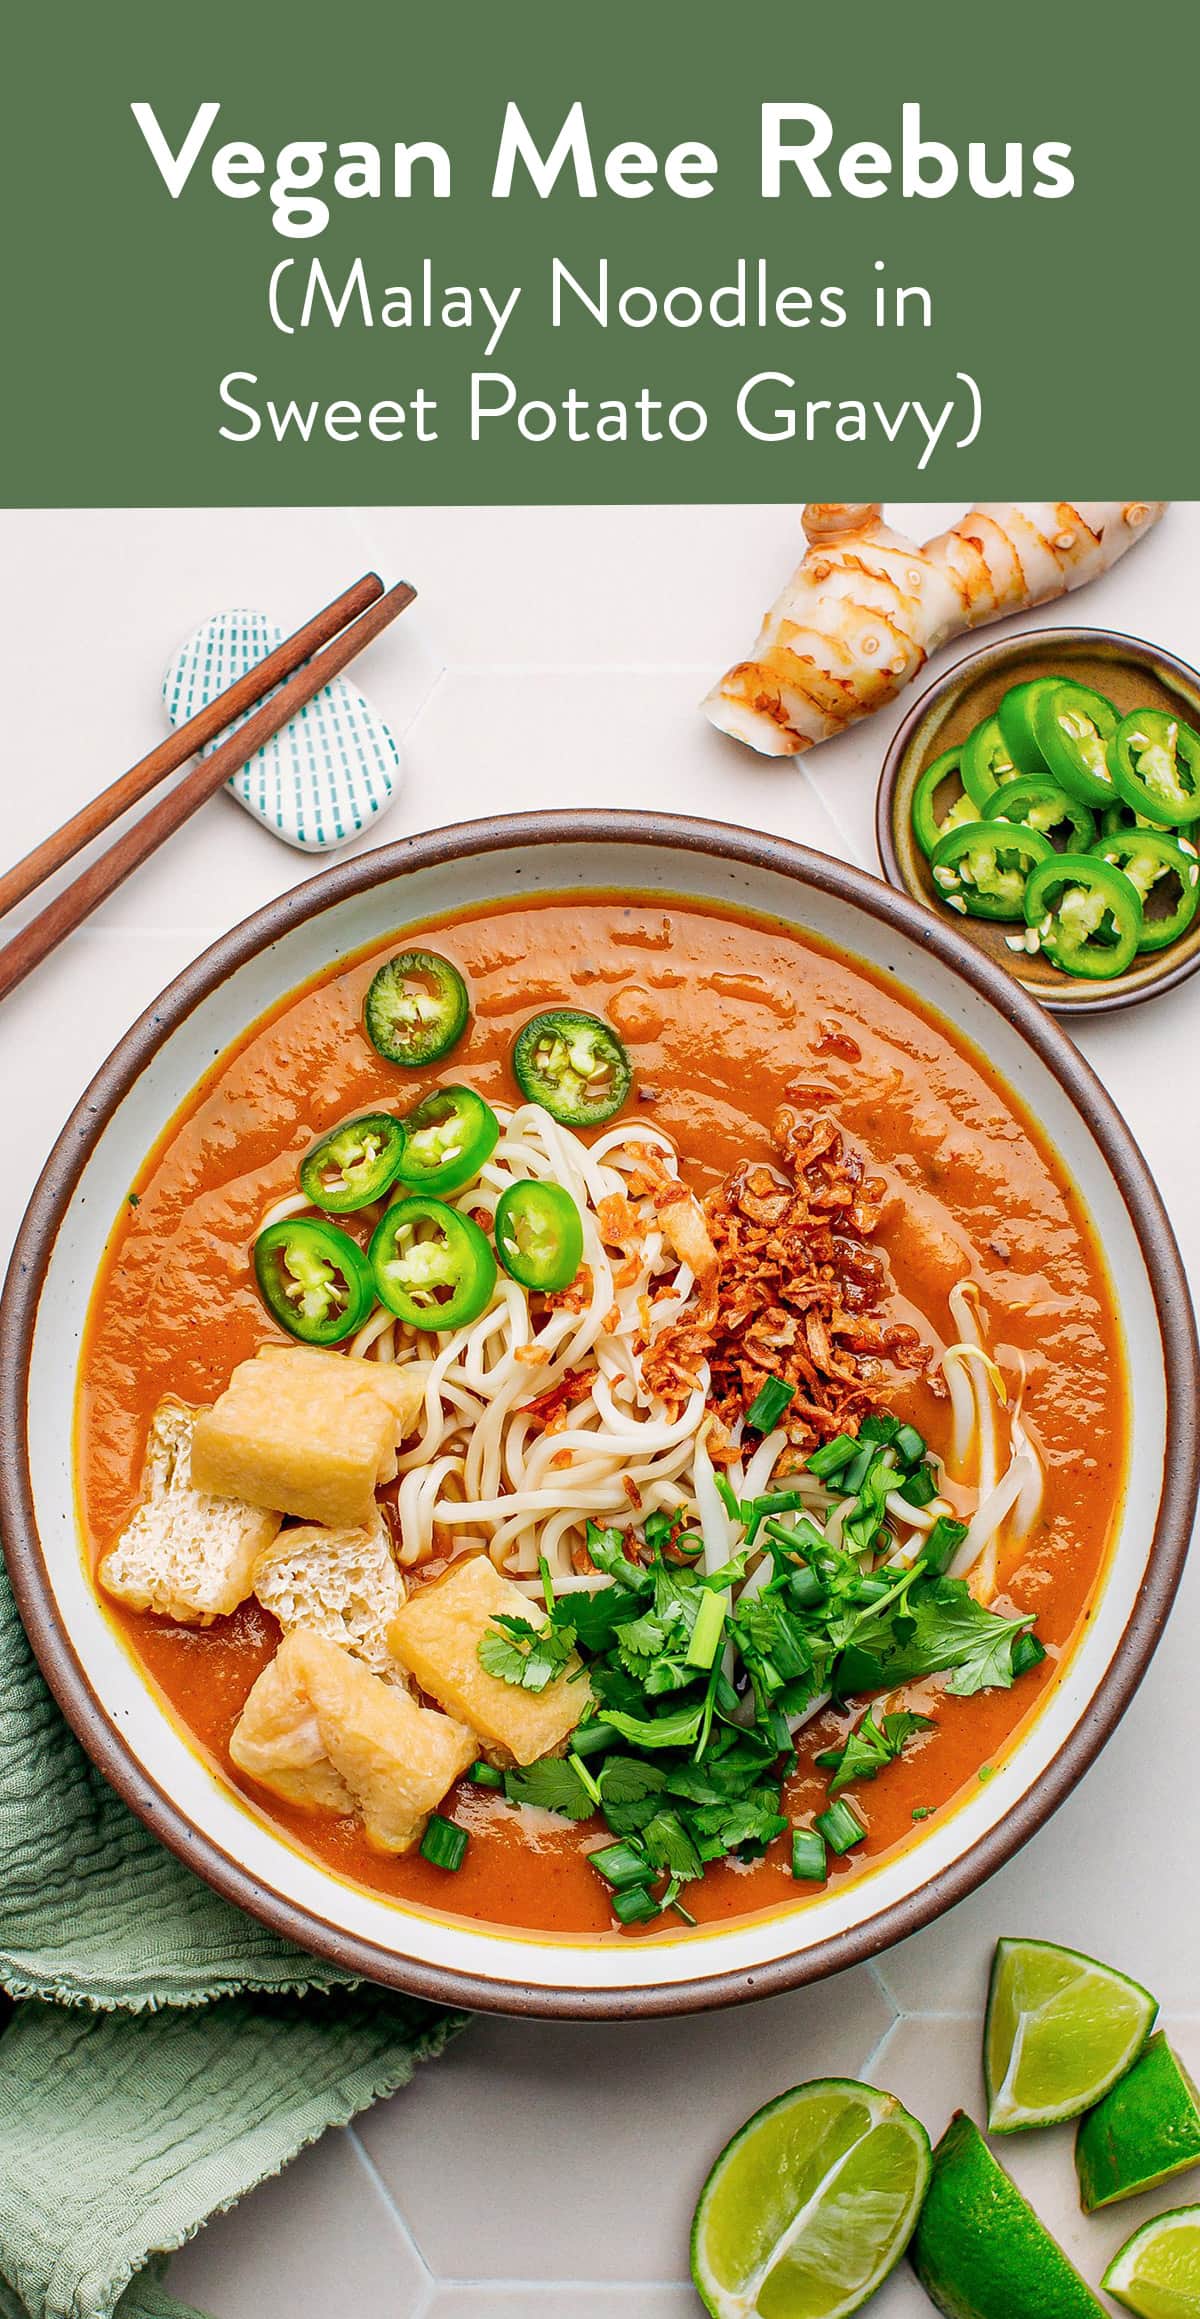 Mee Rebus is a classic Malaysian/Singaporean dish made up of noodles served in a rich and flavorful sweet potato gravy! This vegan version is satisfying, comforting, and loaded with tasty toppings such as fried onions, bean sprouts, chili slices, and fresh herbs! #malaysian #vegan #plantbased